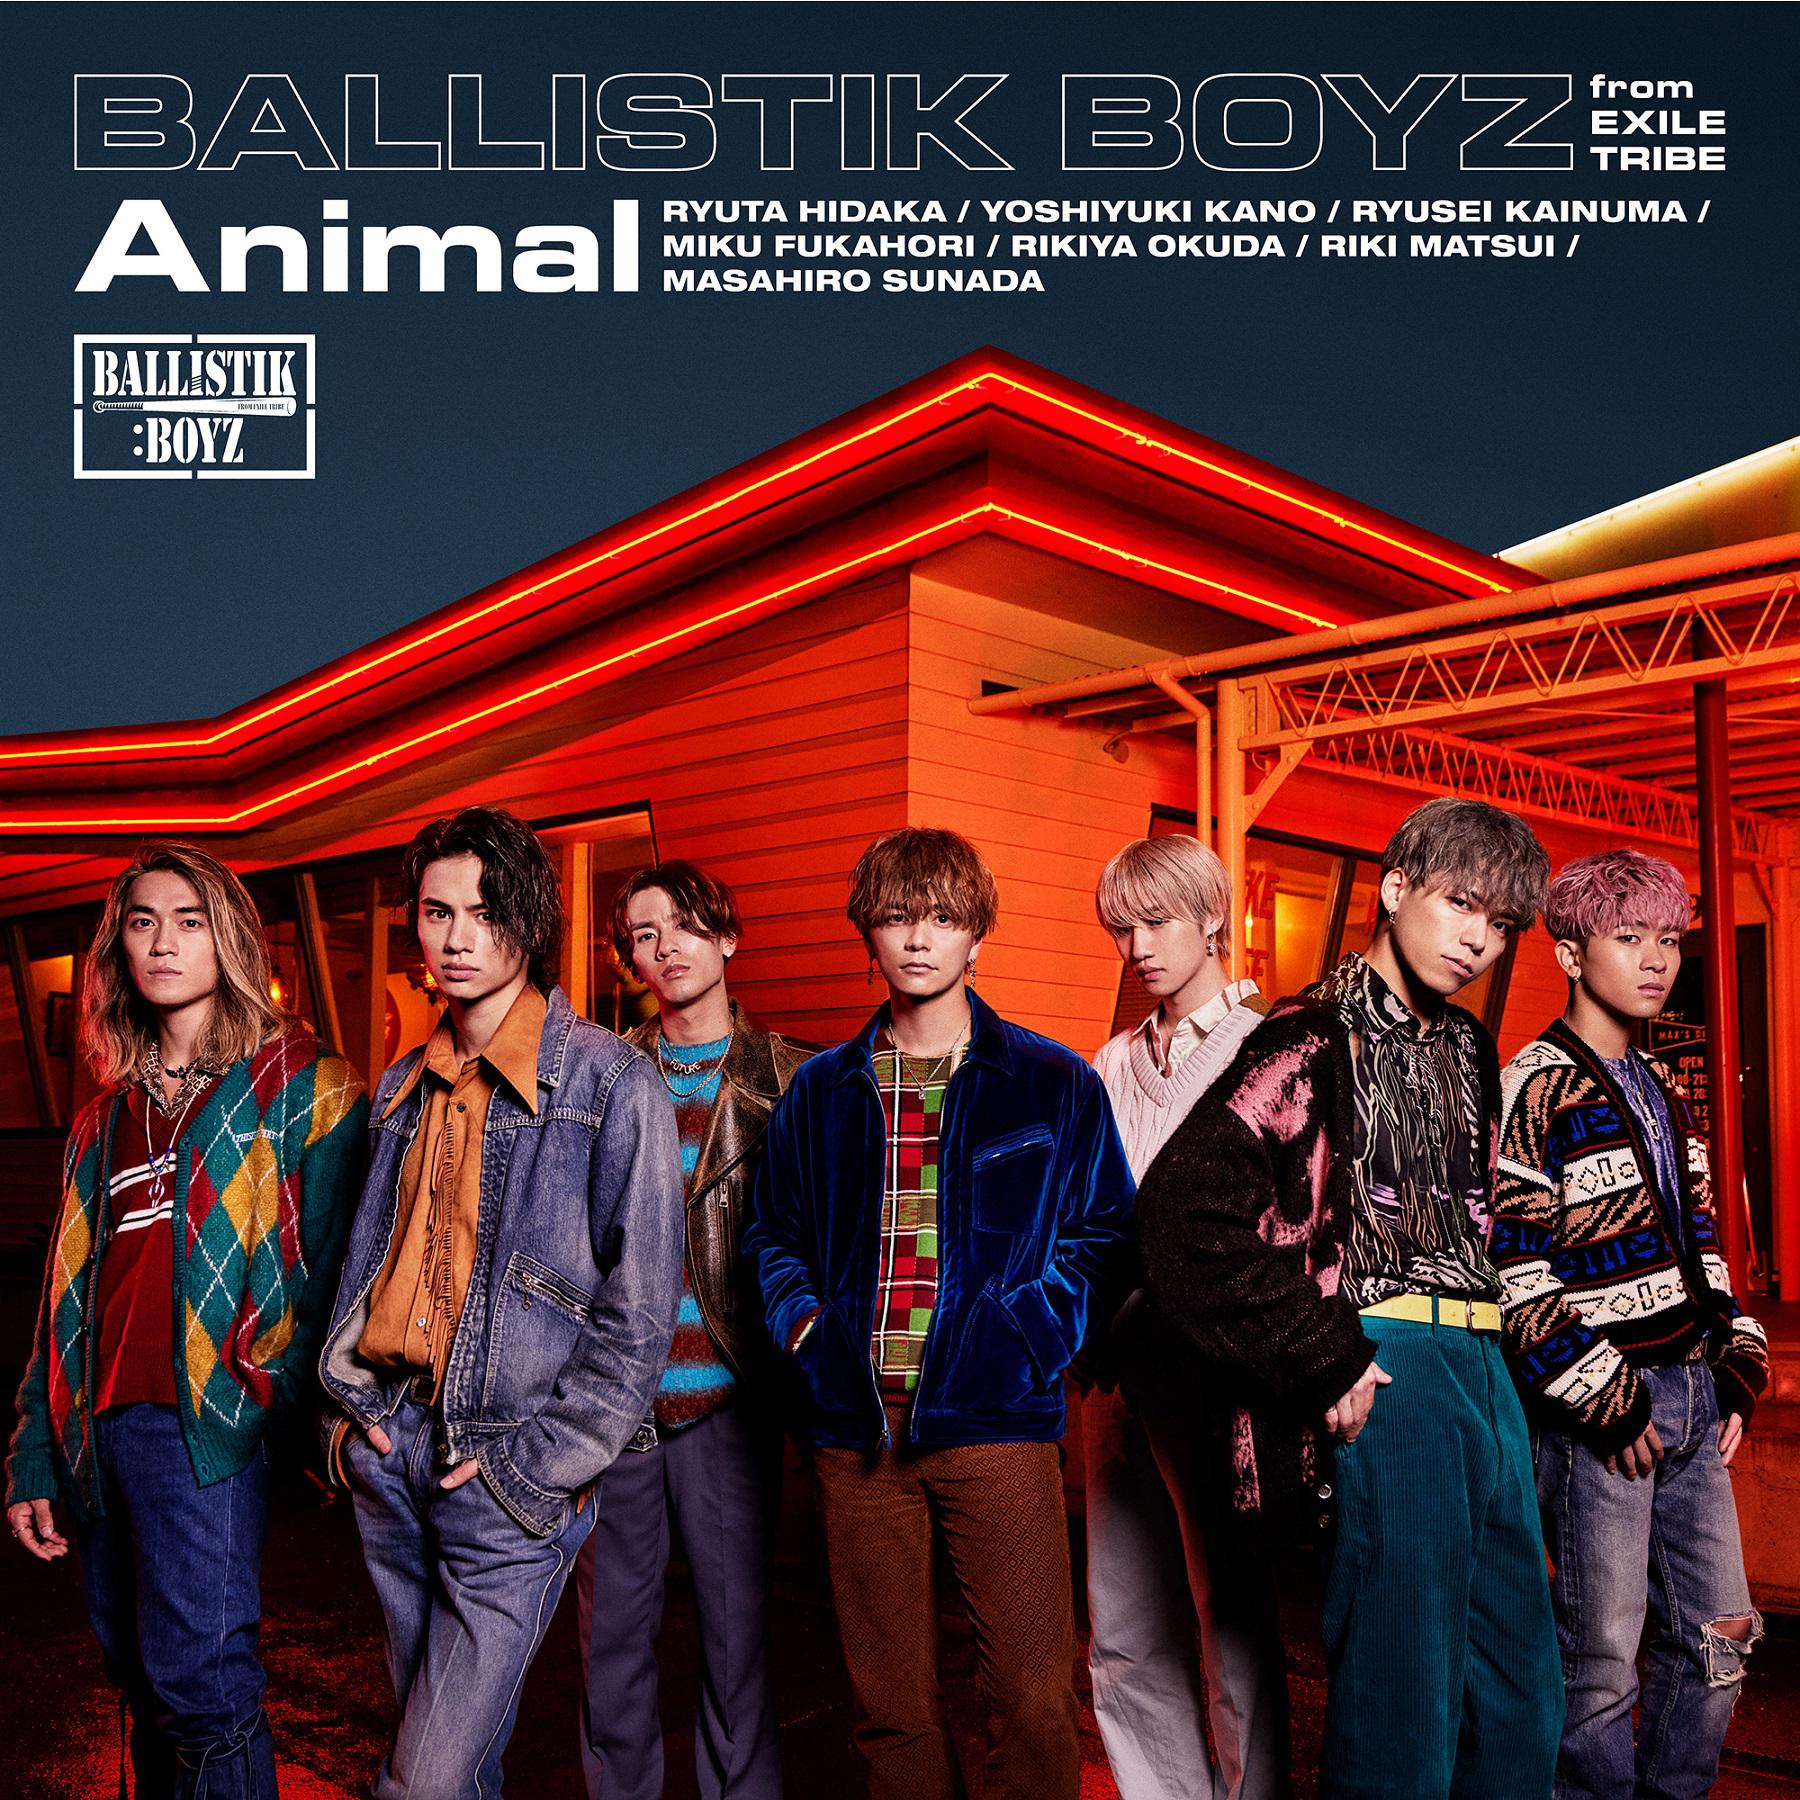 Life Is Party歌词 歌手BALLISTIK BOYZ from EXILE TRIBE-专辑Animal-单曲《Life Is Party》LRC歌词下载